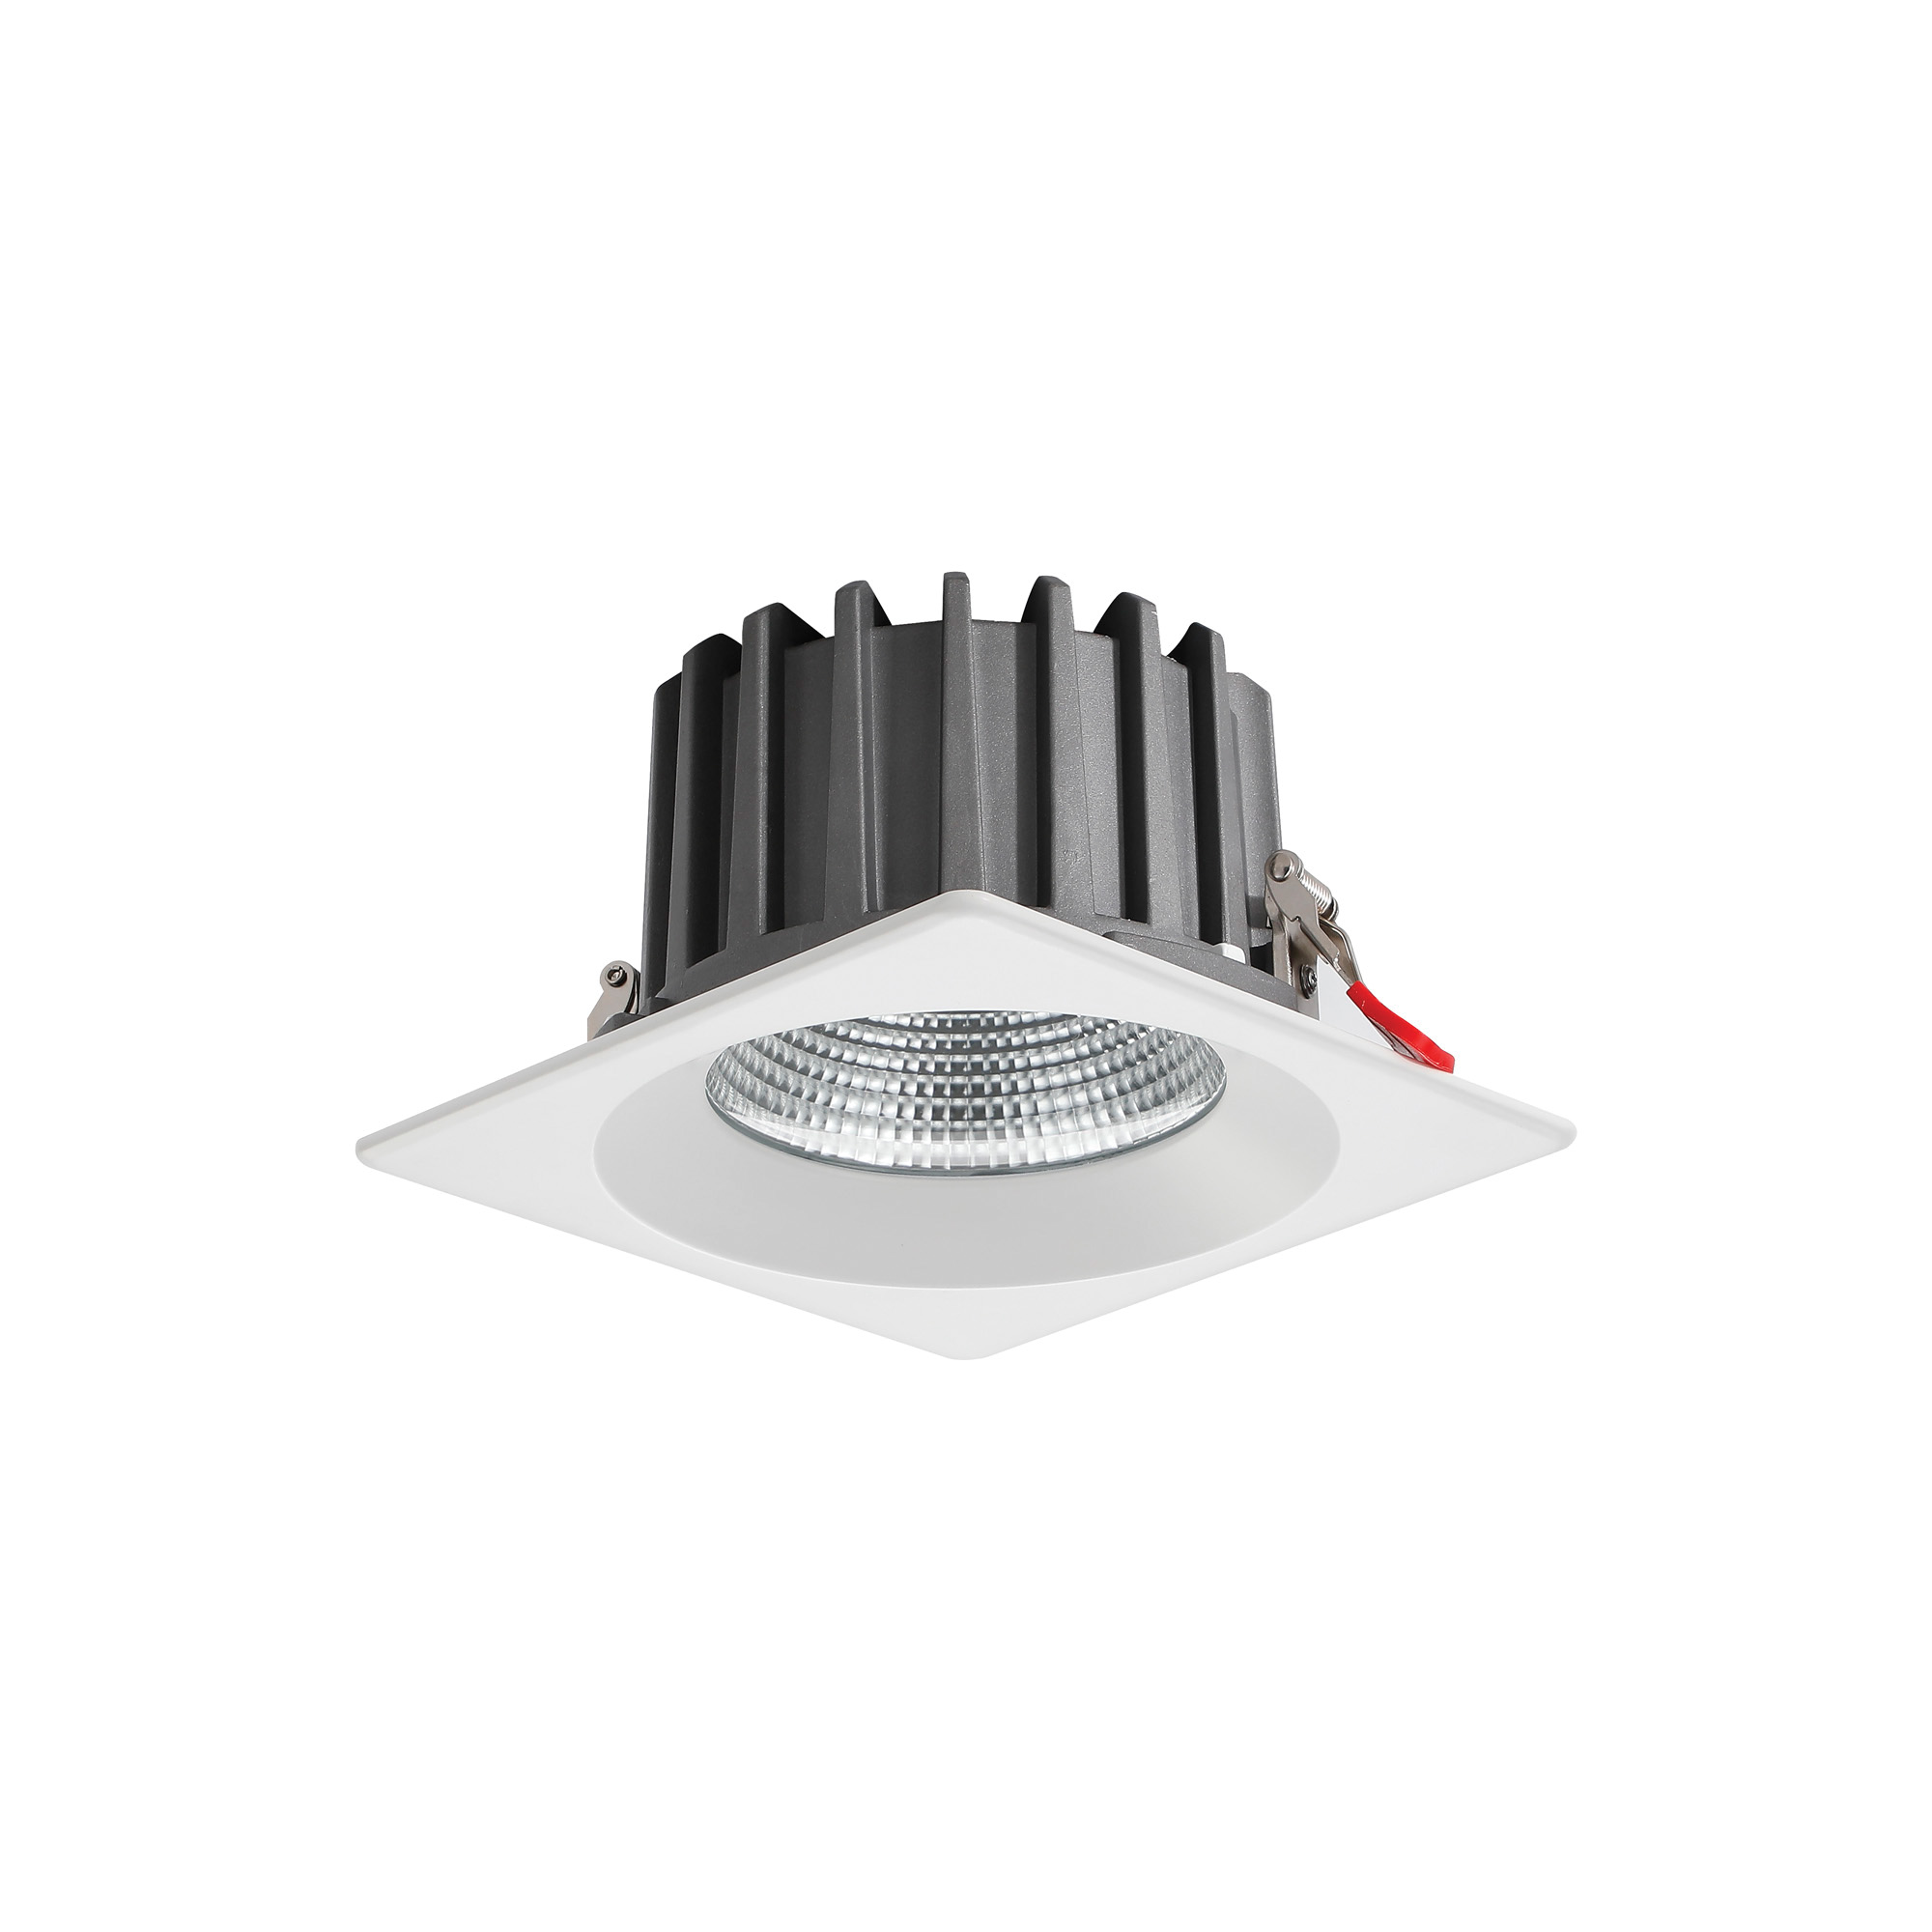 DL200073  Bionic 24; 24W; 700mA; White Deep Square Recessed Downlight; 1920lm ;Cut Out 155mm; 42° ; 3000K; IP44; DRIVER INC.; 5yrs Warranty.